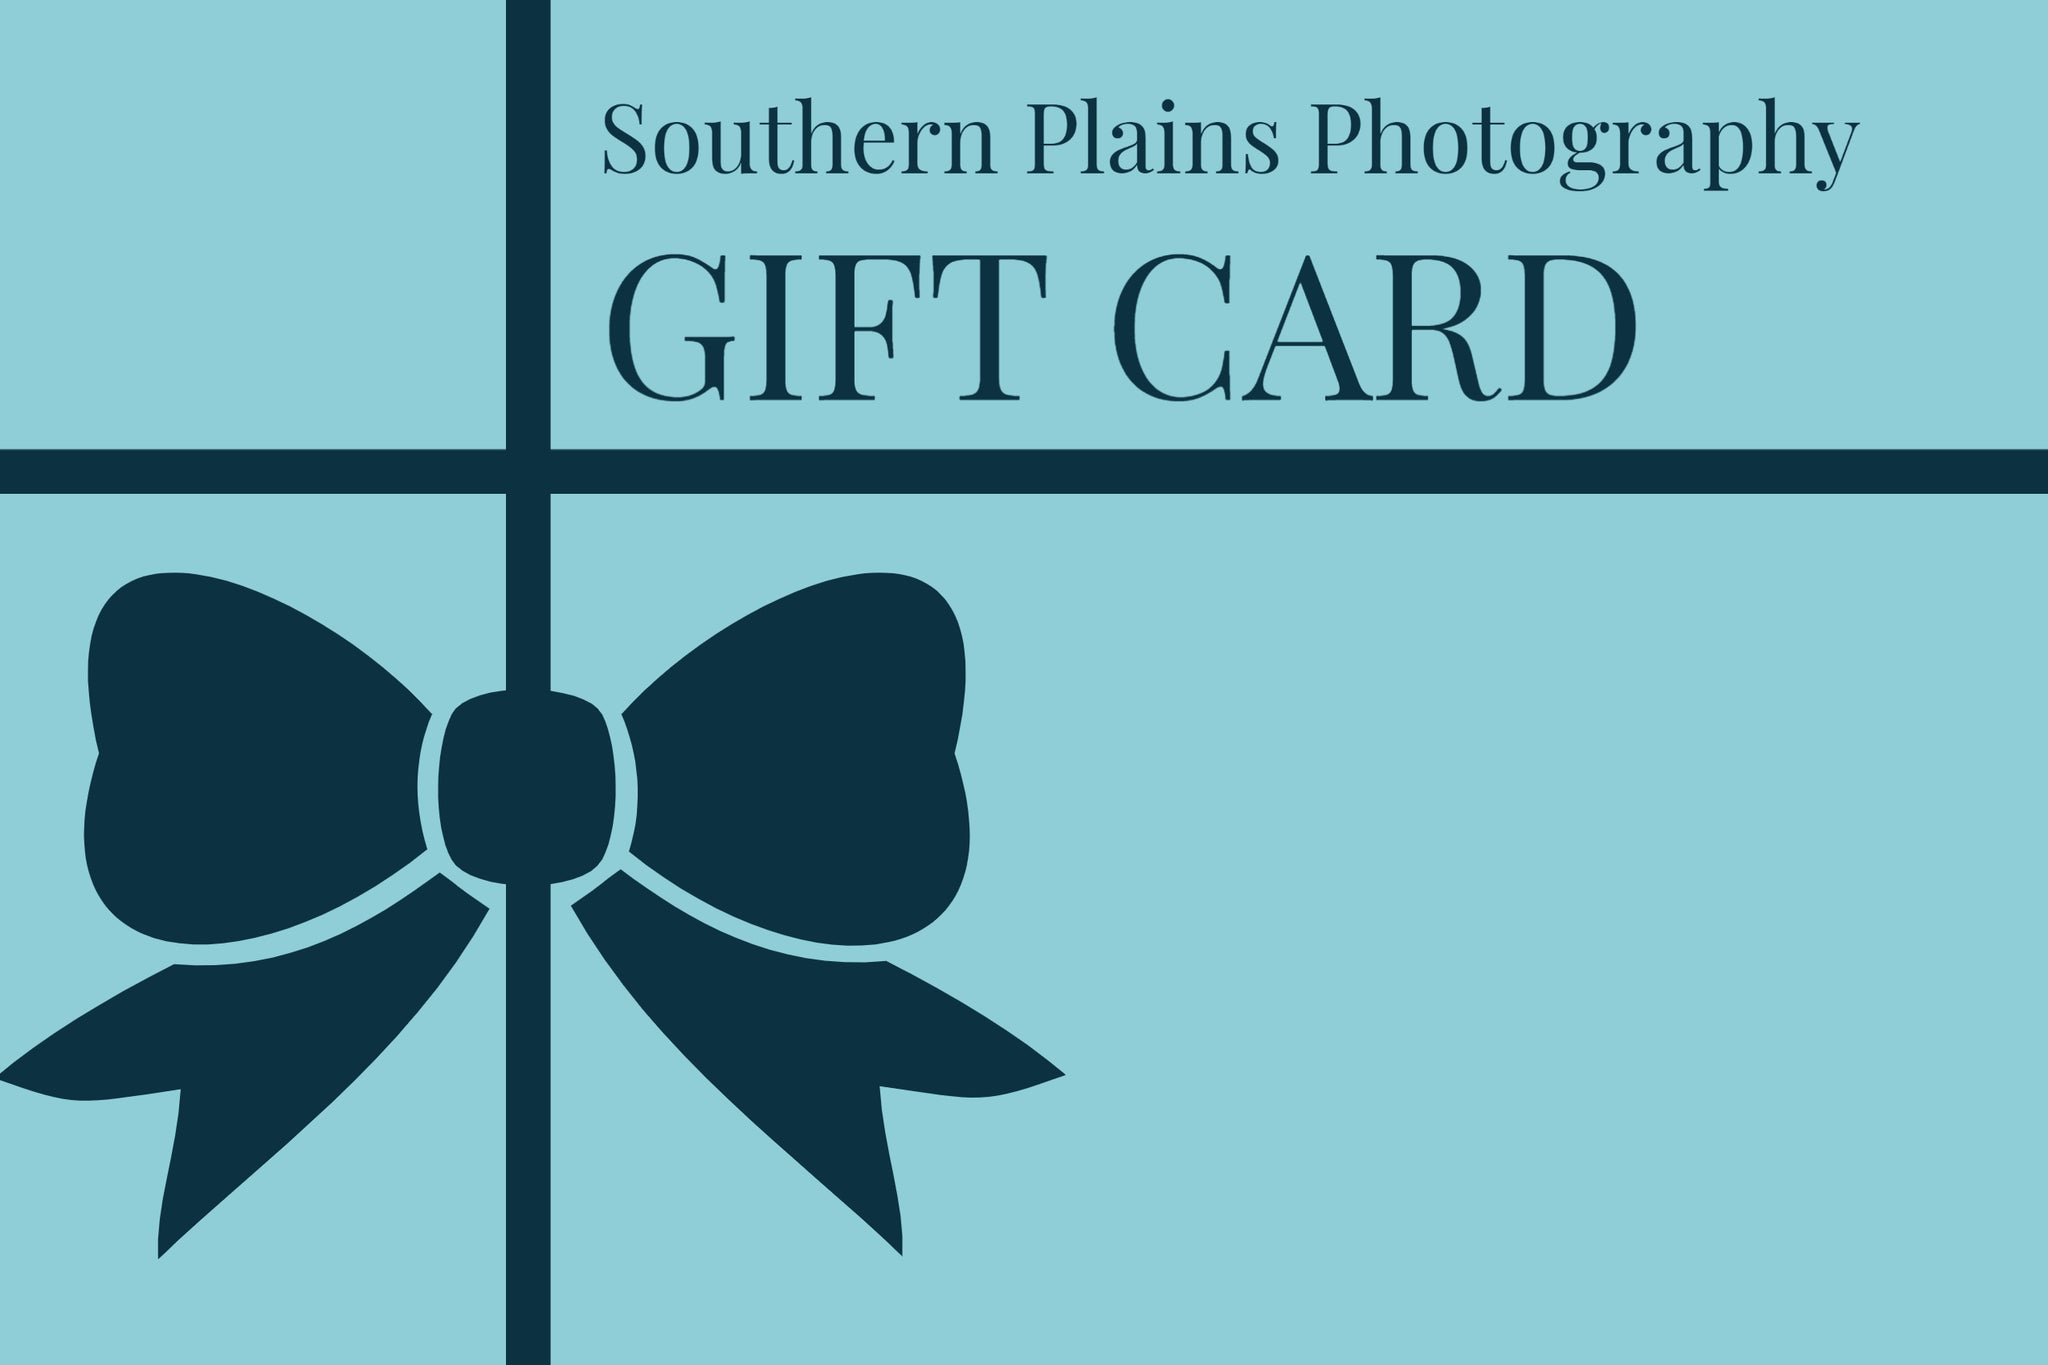 Gift cards to purchase prints and wall art from Southern Plains Photography by Sean Ramsey.